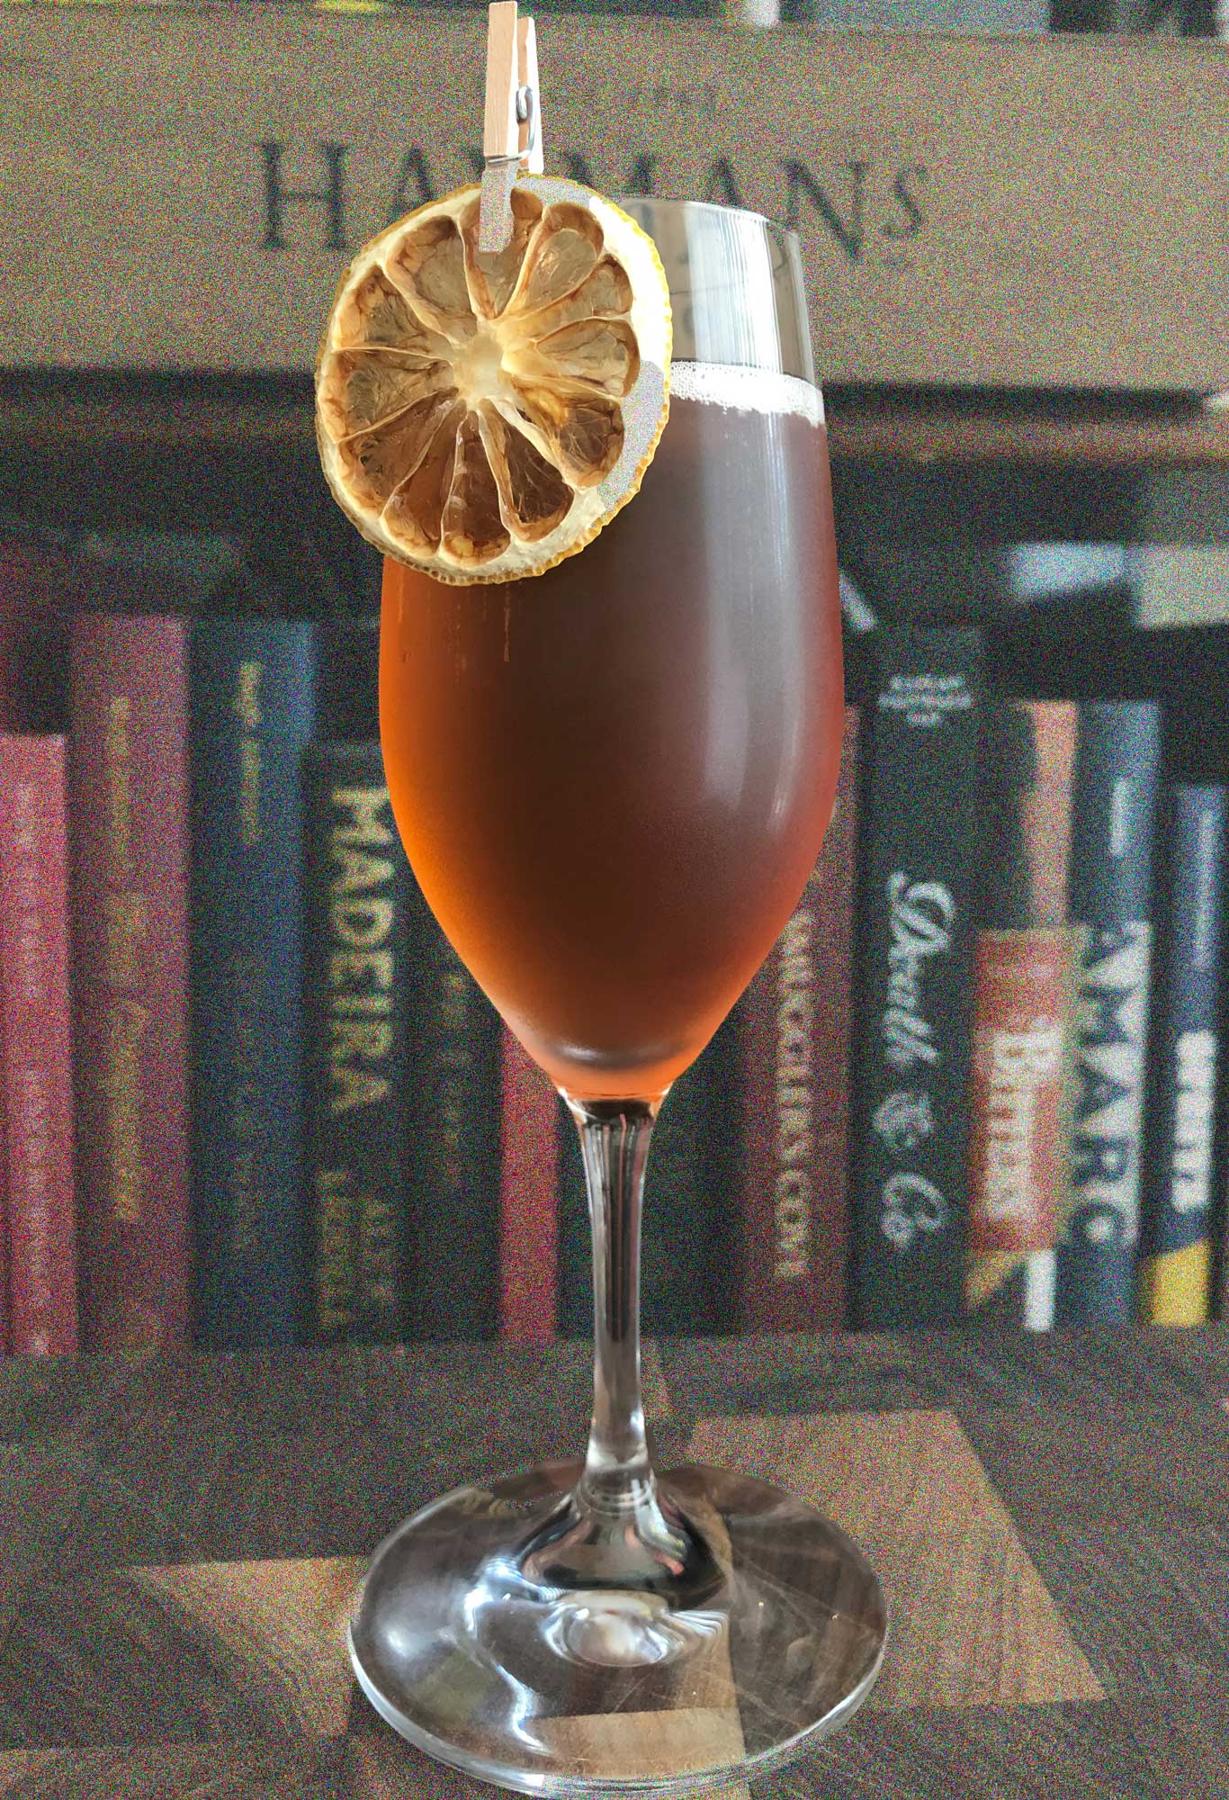 An example of the Merry Berries, the mixed drink (drink) featuring sparkling wine, Hayman’s Sloe Gin, Pasubio Vino Amaro, sparkling wine, and grapefruit twist; photo by Lee Edwards